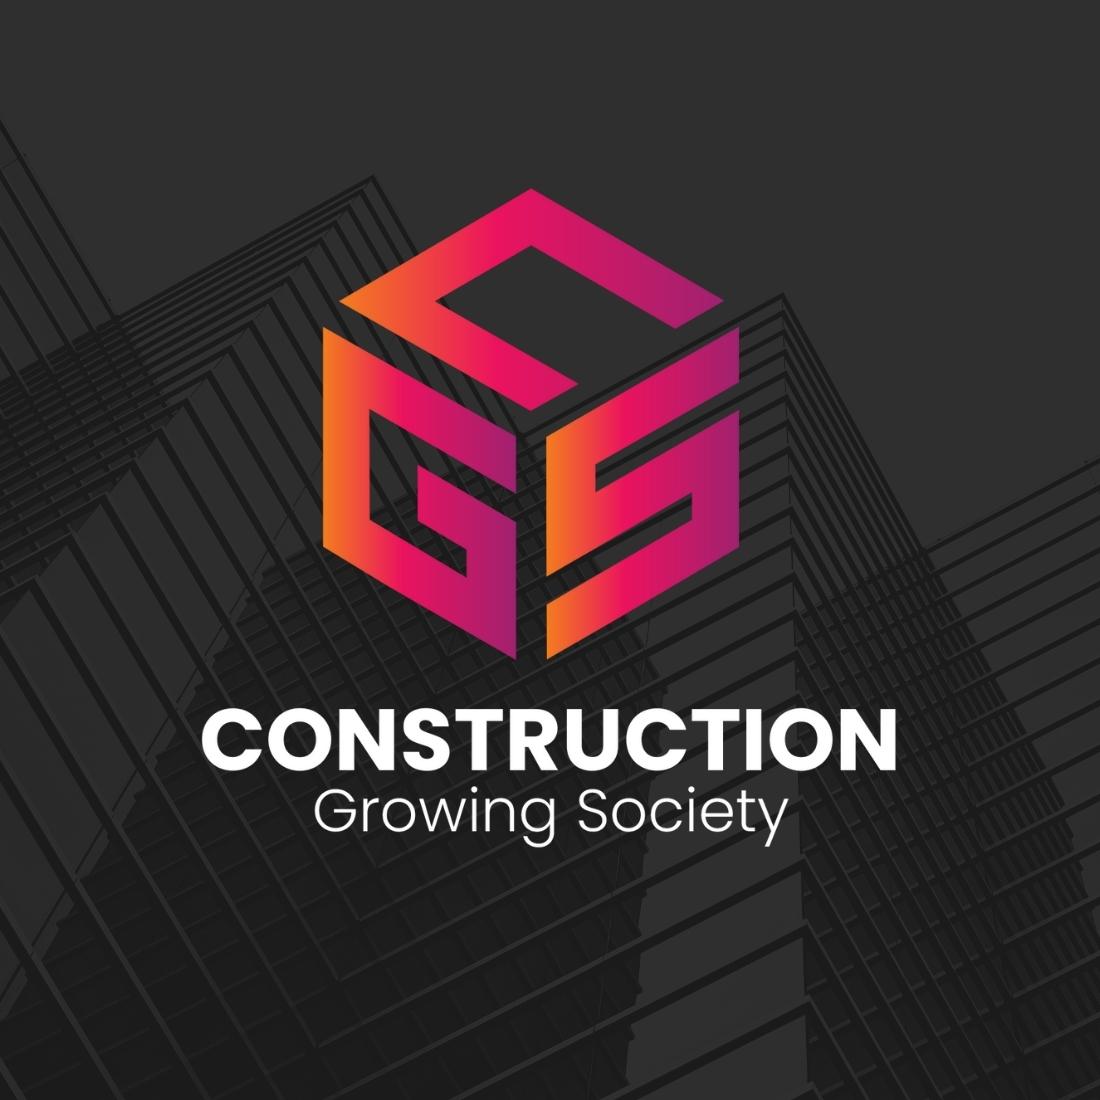 CGS (Construction Growing Society) Construction logo-Only $7 cover image.